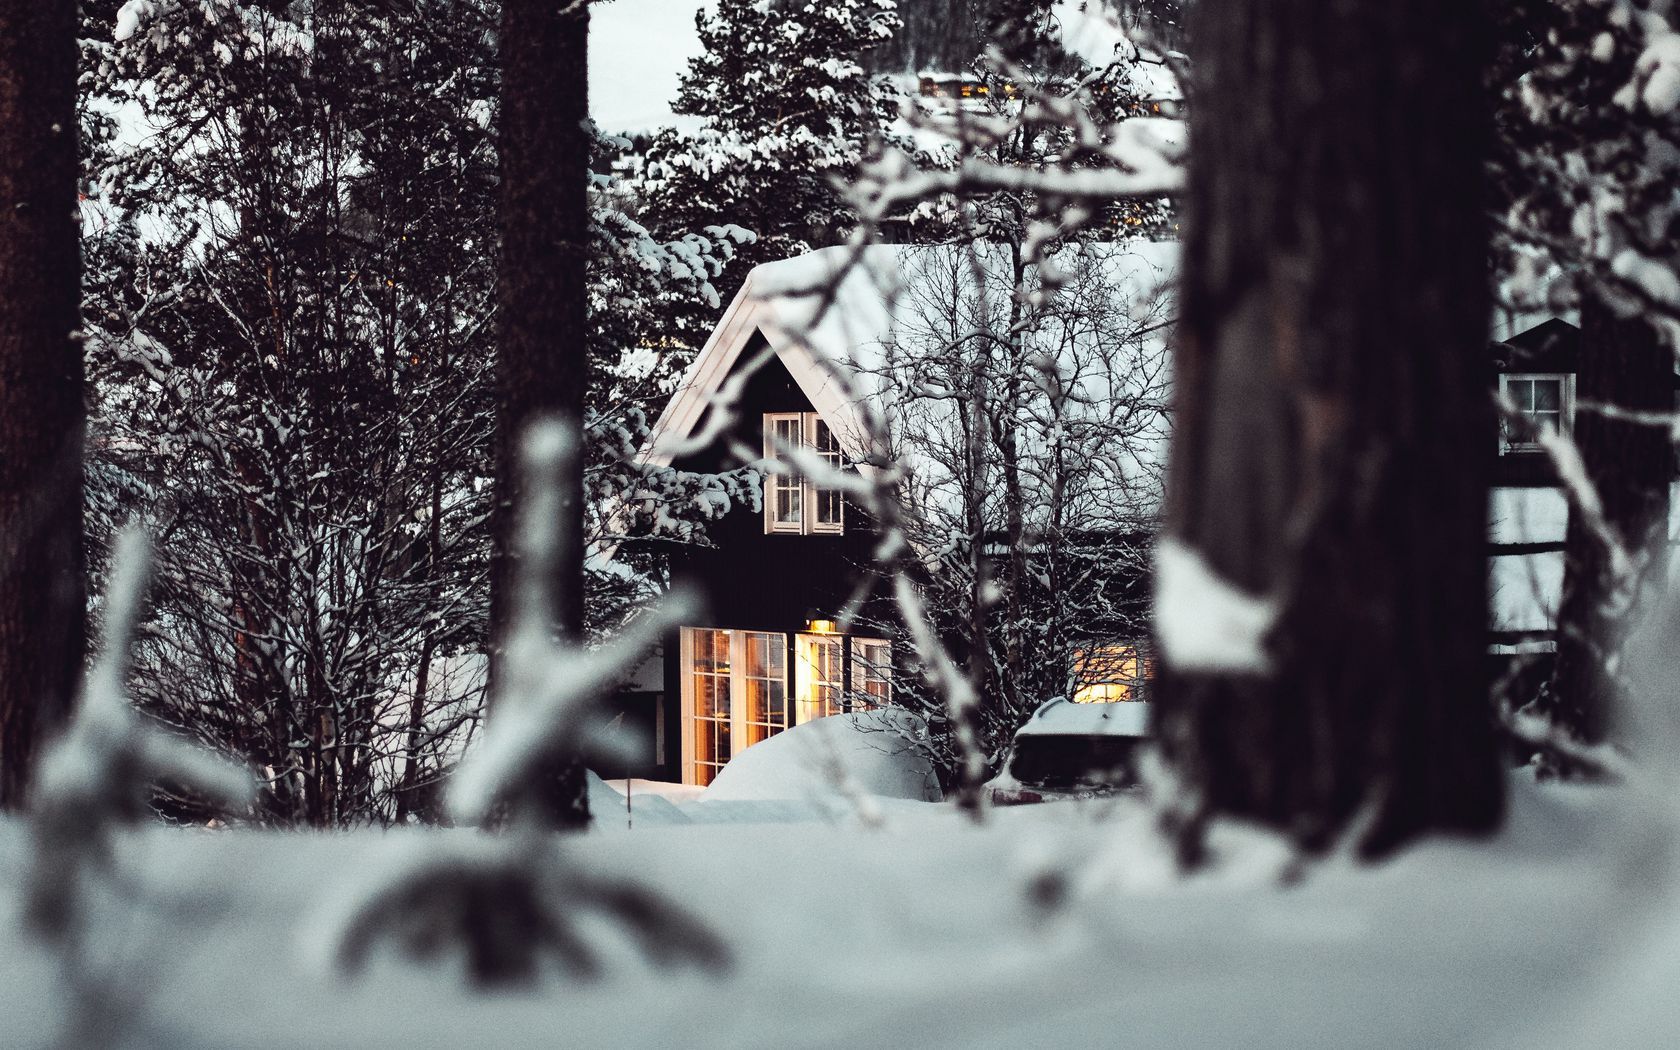 Download wallpaper 1680x1050 house, forest, snow, winter widescreen 16:10 HD background